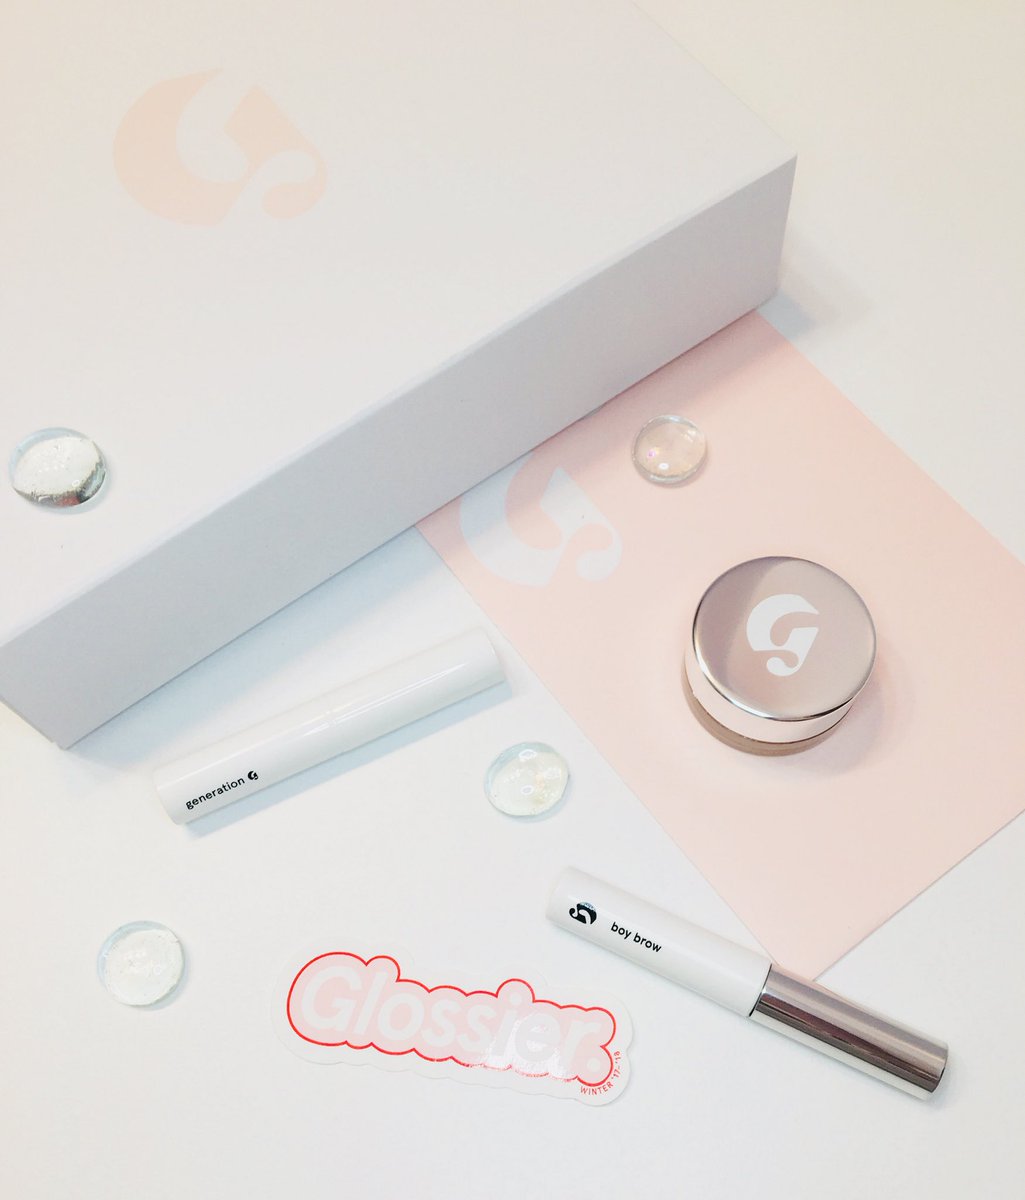 NEW POST! 🎉

I finally tried out some @glossier products 💕💄

Check out my thoughts here 💋👉🏻 theeclifestyle.com/2018/04/glossi…

#bblogger #beauty #thebloggercrowd #thebloggershub @FemBloggers @ChicBloggers @CDNCreatrsTribe @CDNBloggerRT @Bloggersplan @Bloggeration_